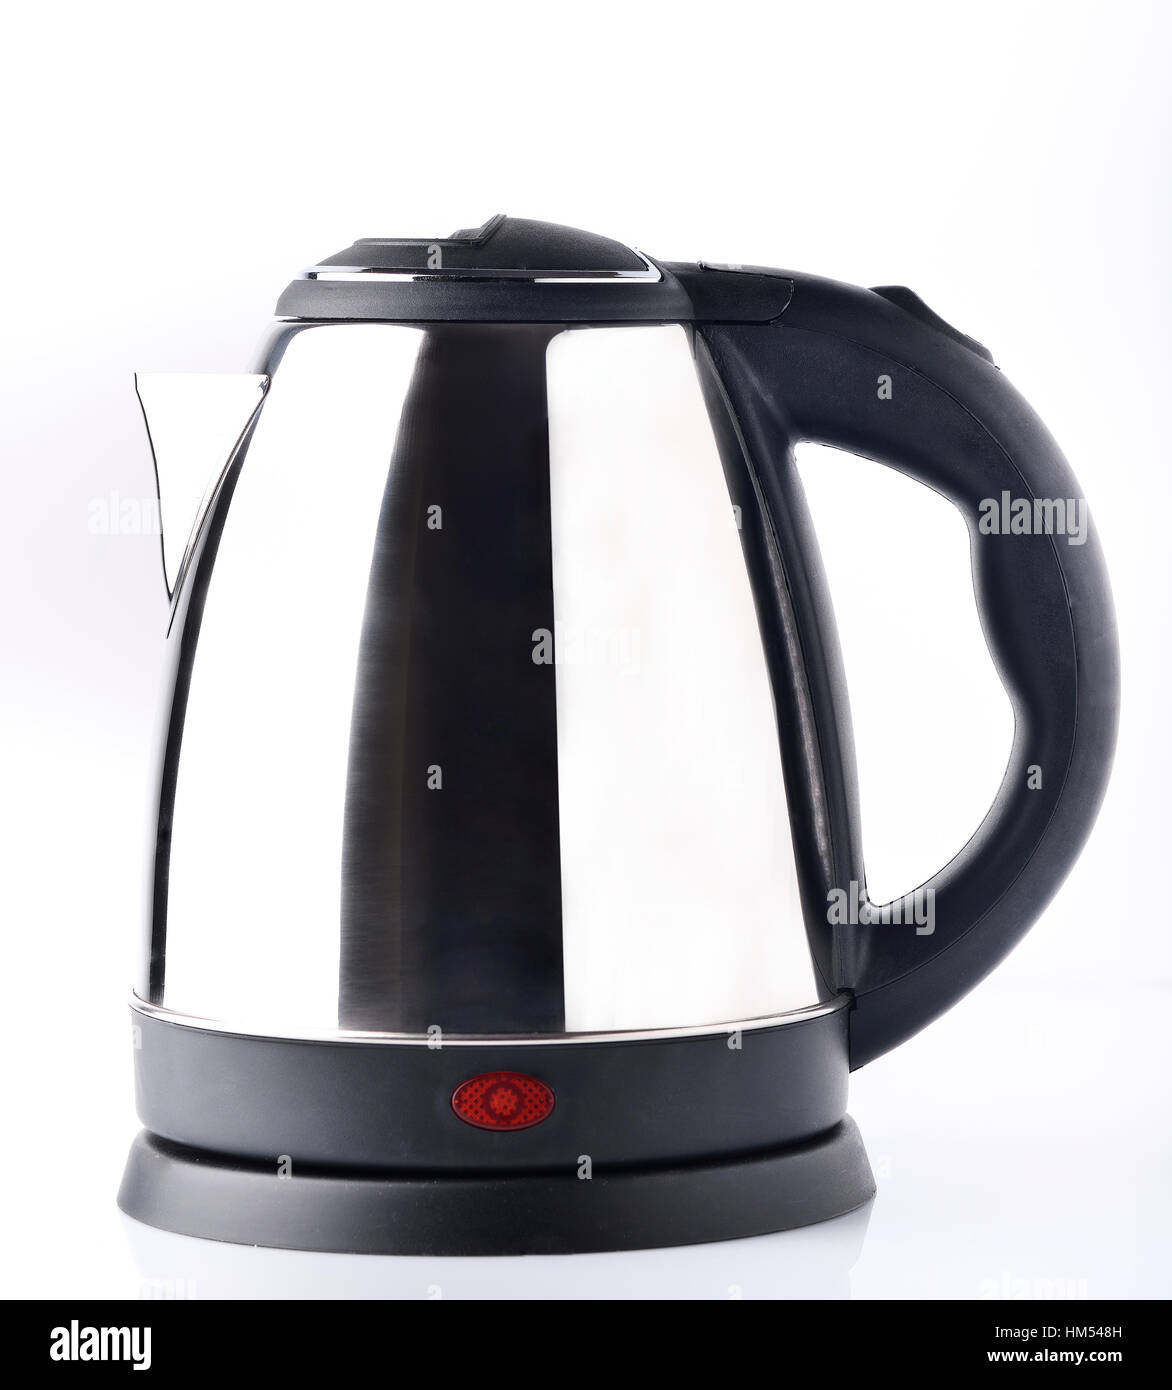 https://c8.alamy.com/comp/HM548H/side-view-of-electric-kettle-made-of-stainless-steel-on-white-background-HM548H.jpg